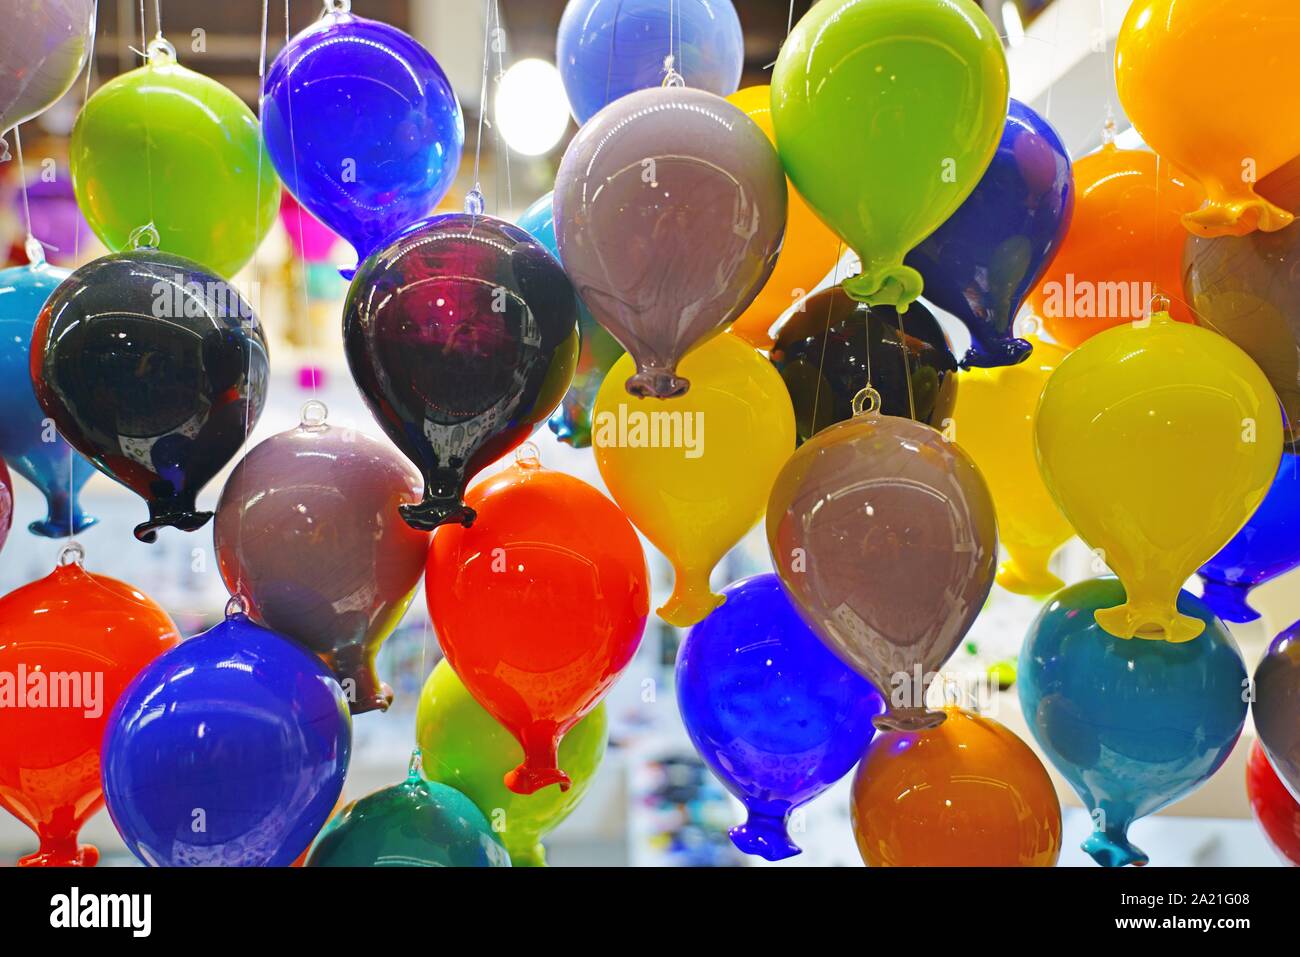 Hanging display of decorative balloons made of Murano glass Stock Photo